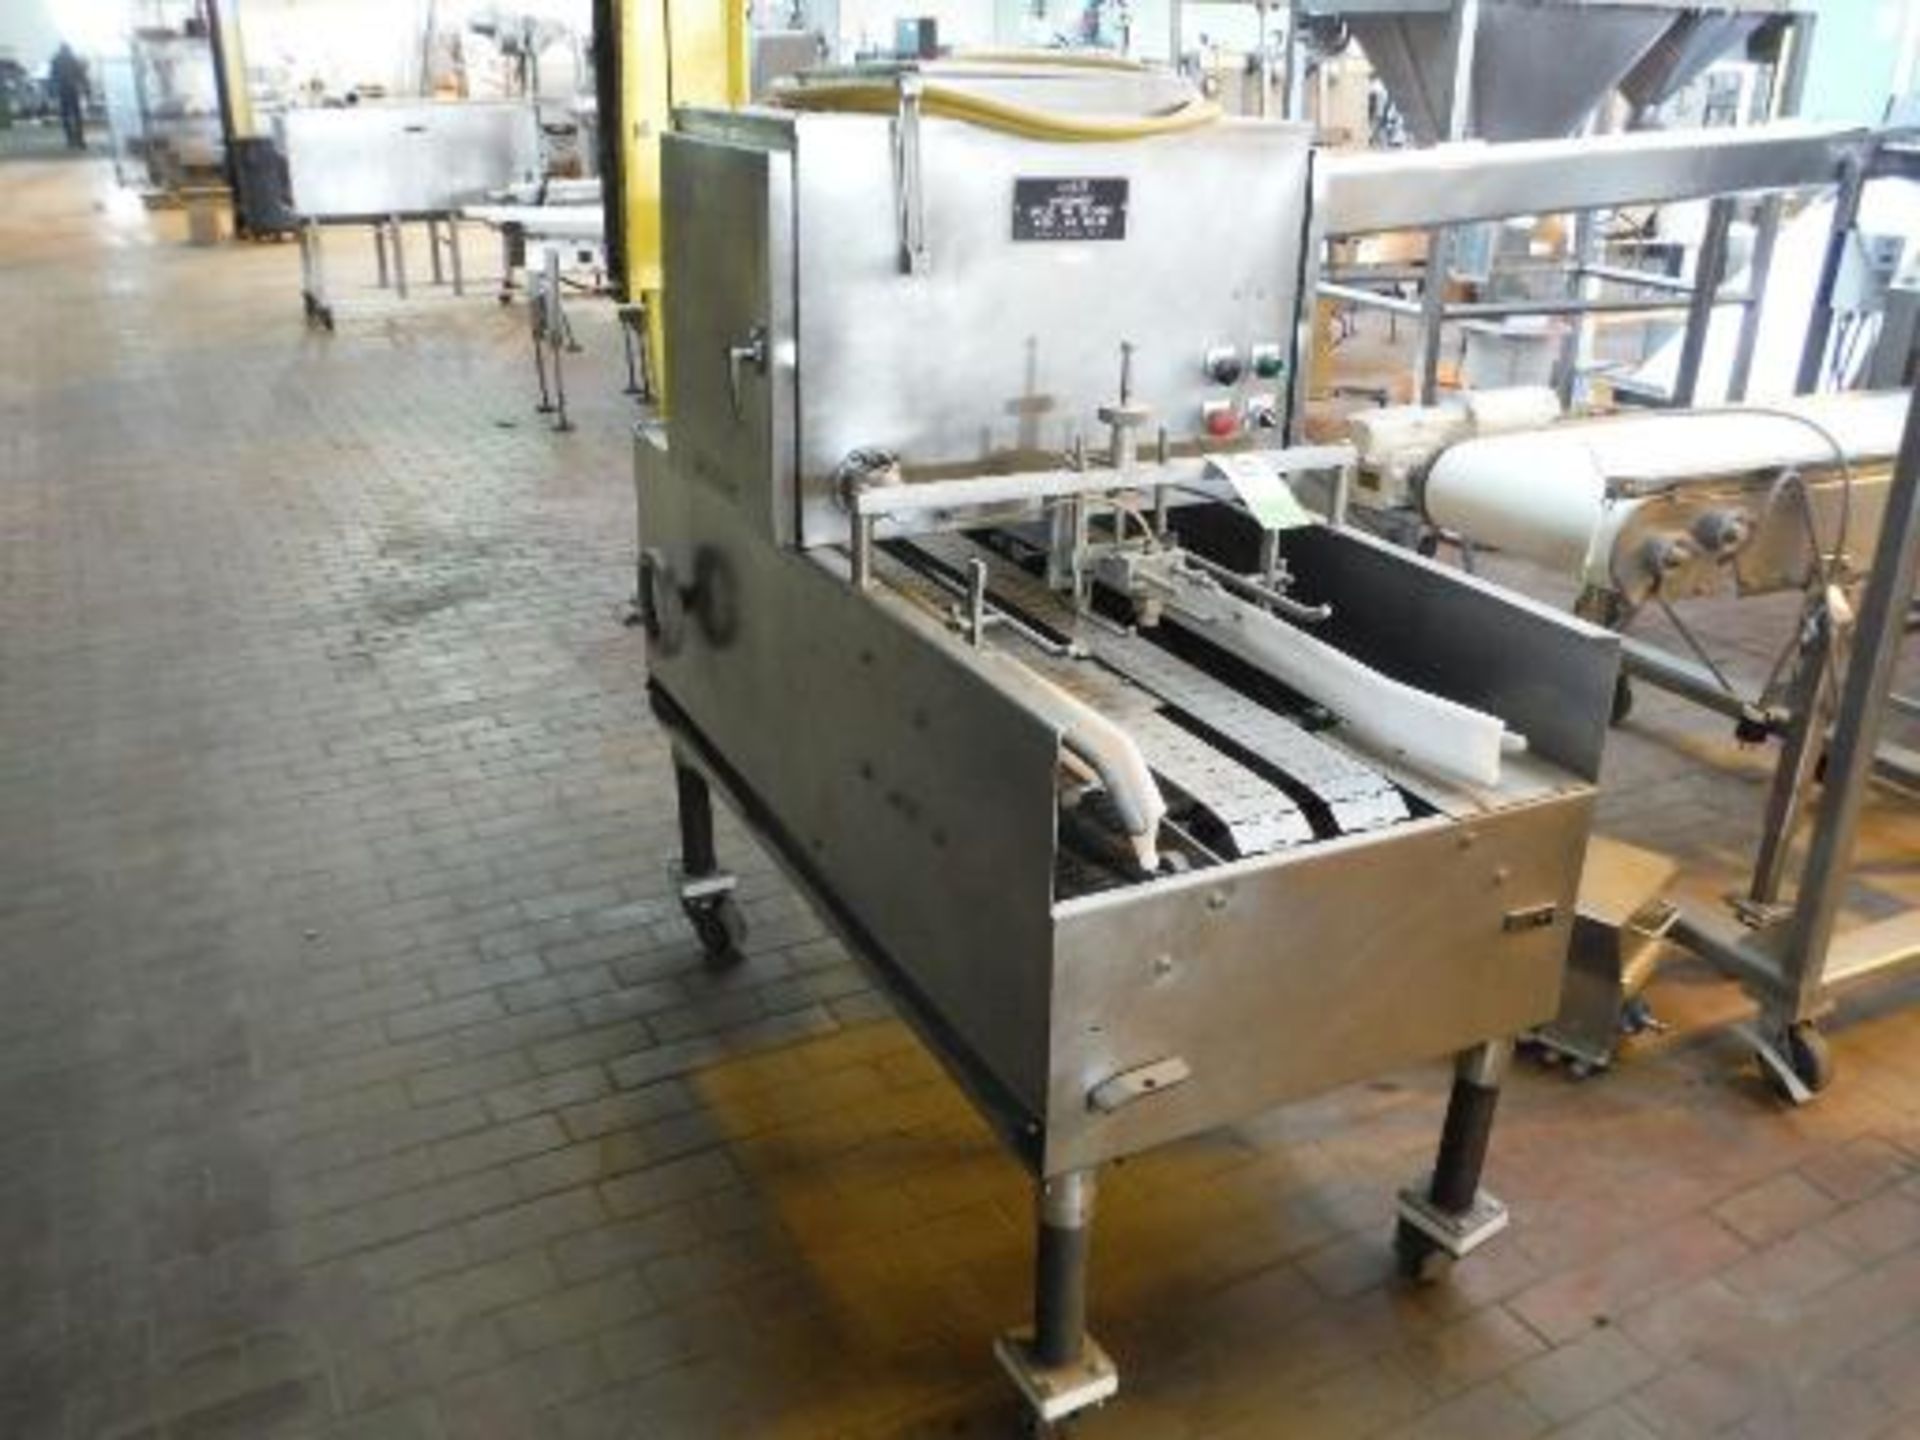 Malet Automatic Bread Pan Greaser, Model 412-77, 60 in. long x 33 in. tall, SS frame, casters ***___